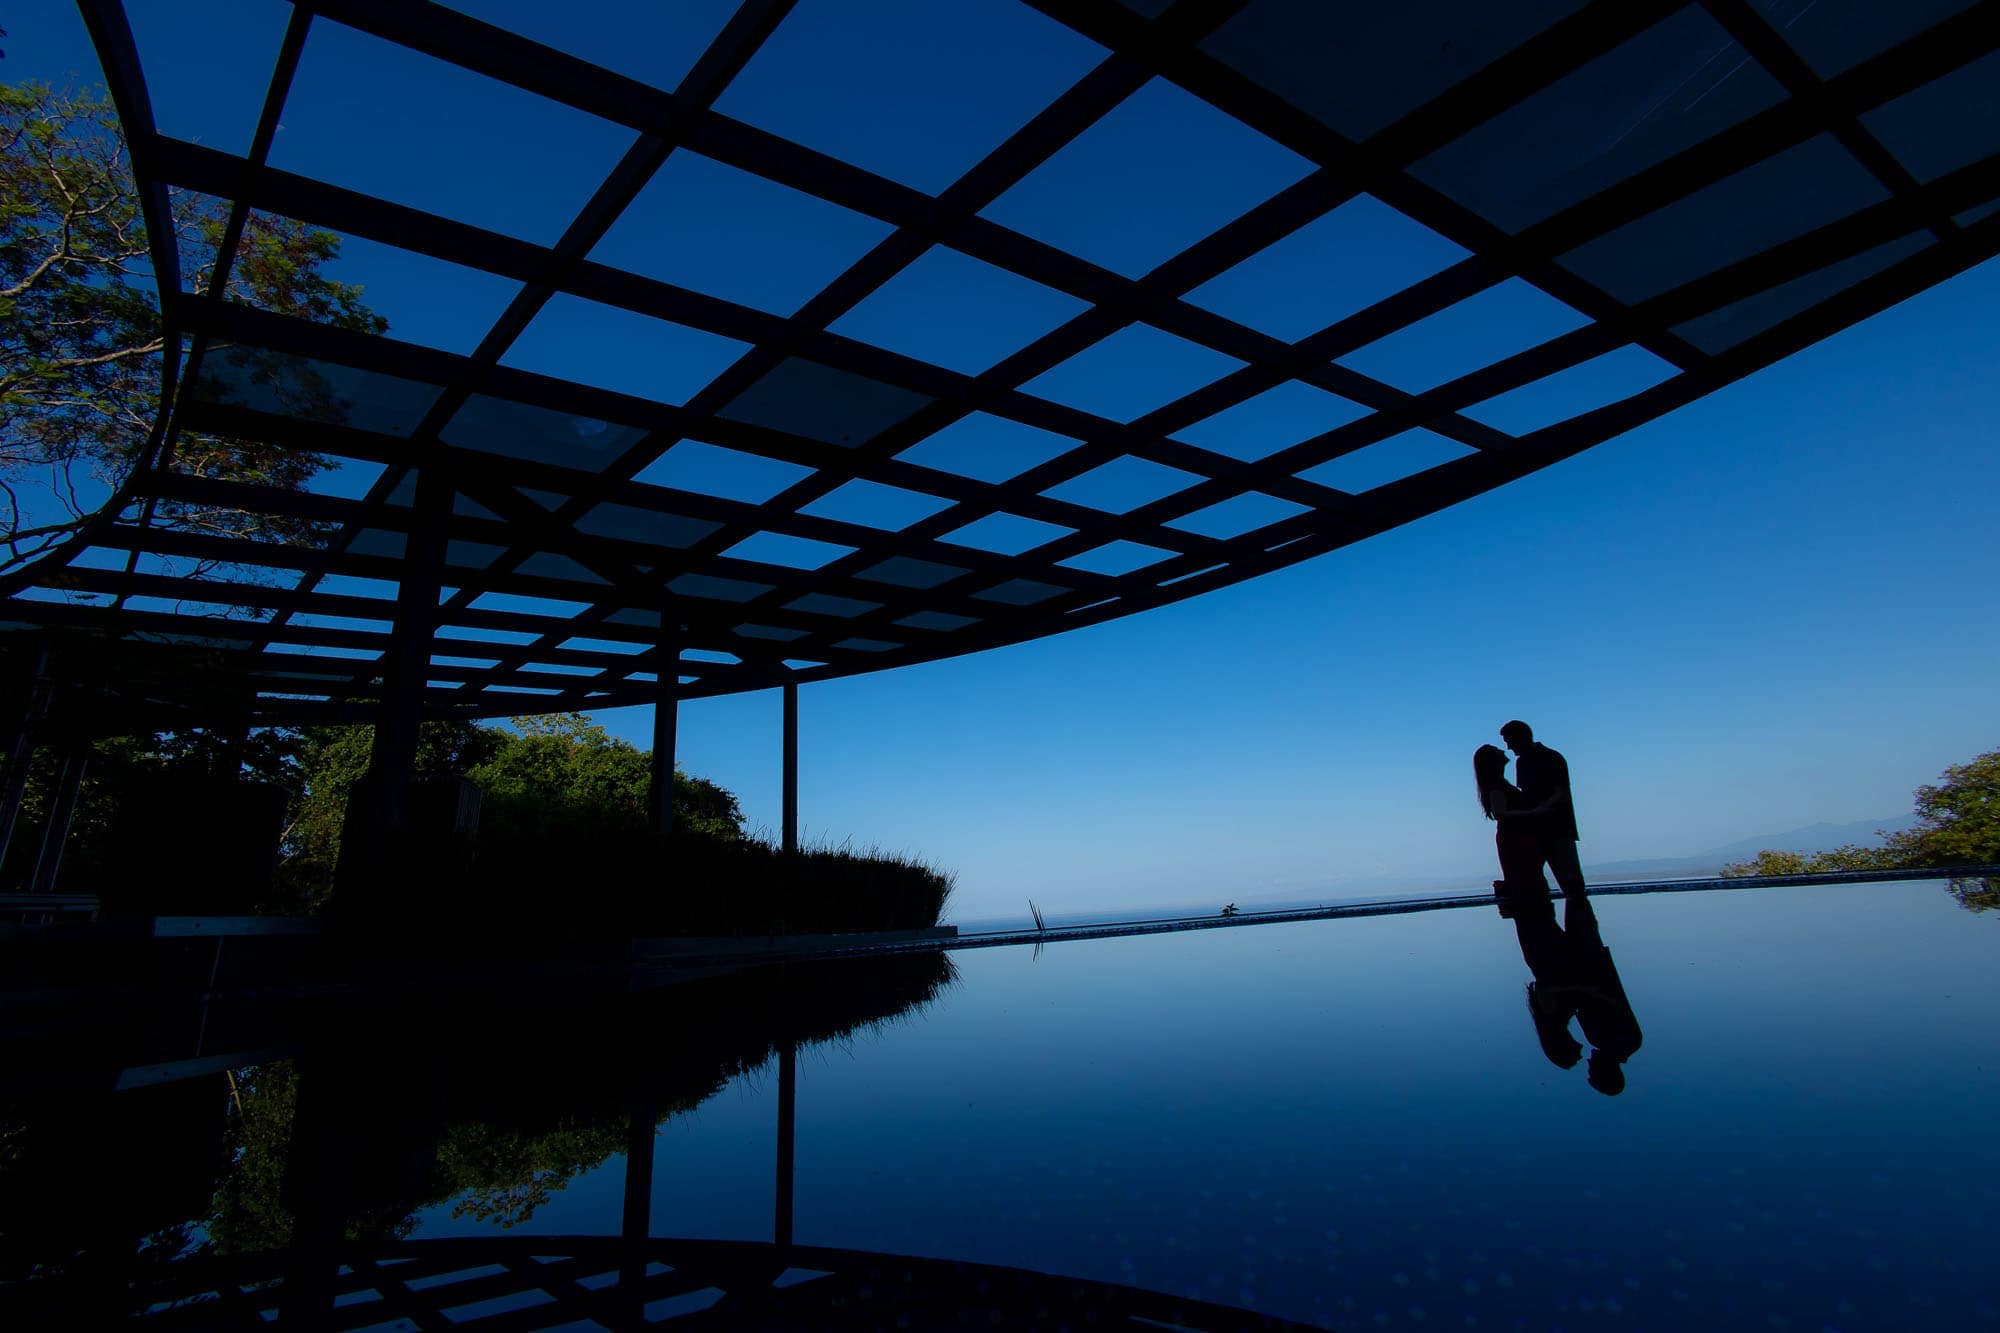 reflection of the bride and groom's silhouette on the pool